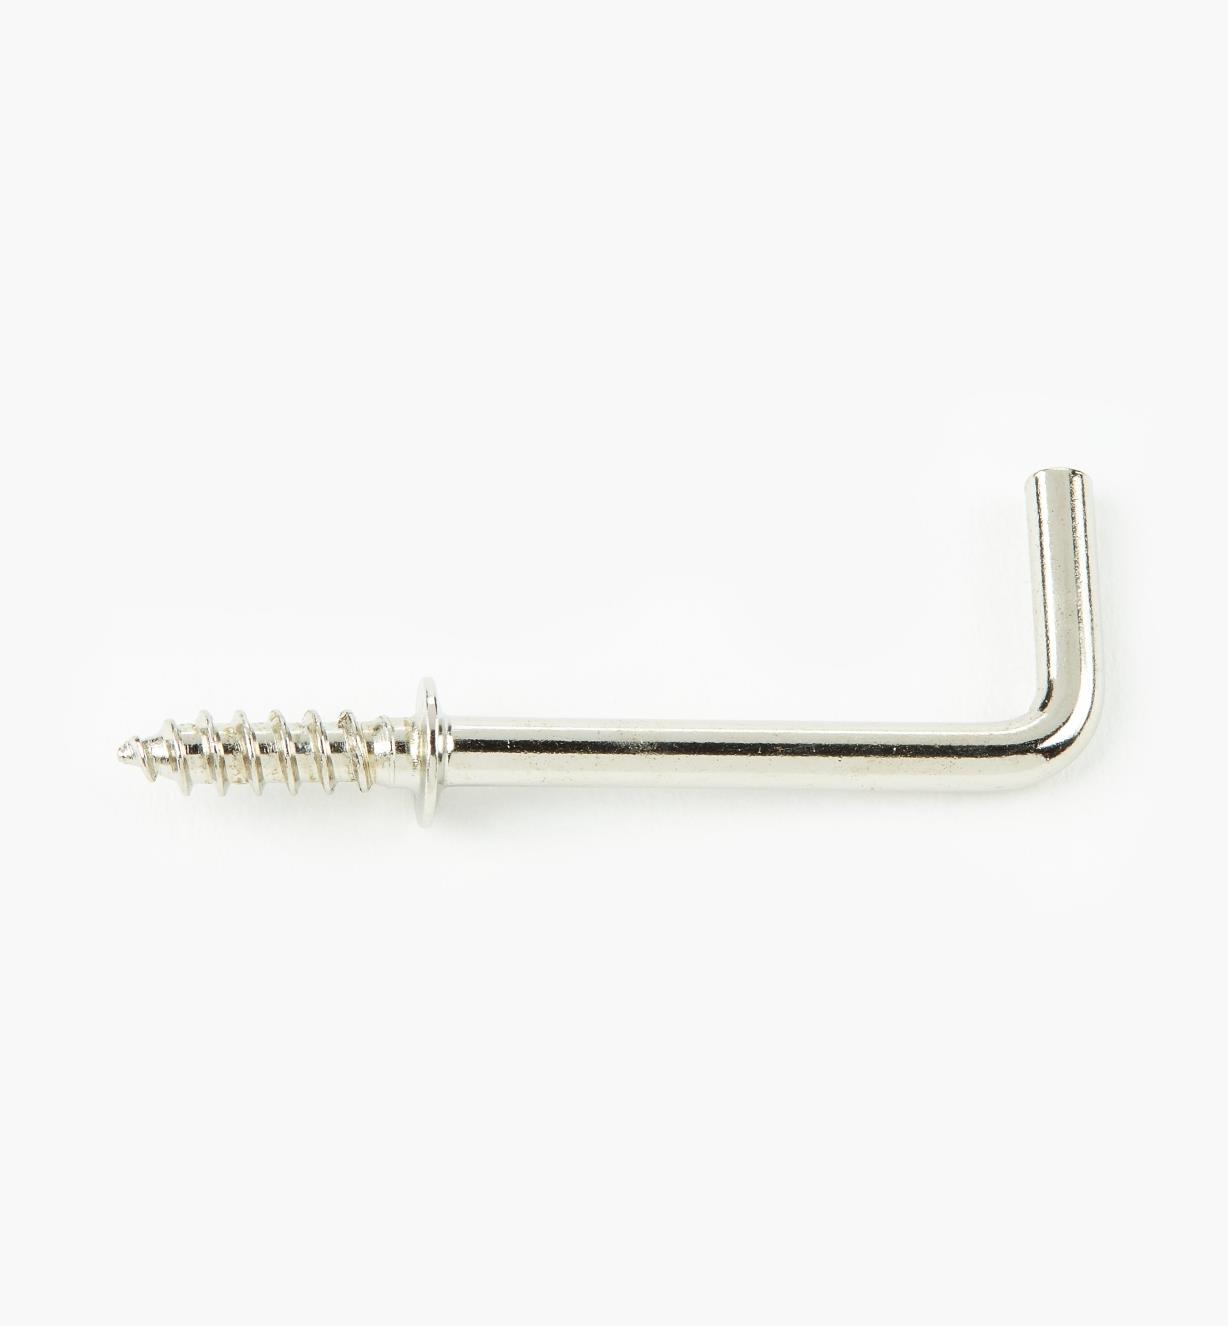 00S5613 - 1" Nickel -Plated Square Hooks (100)